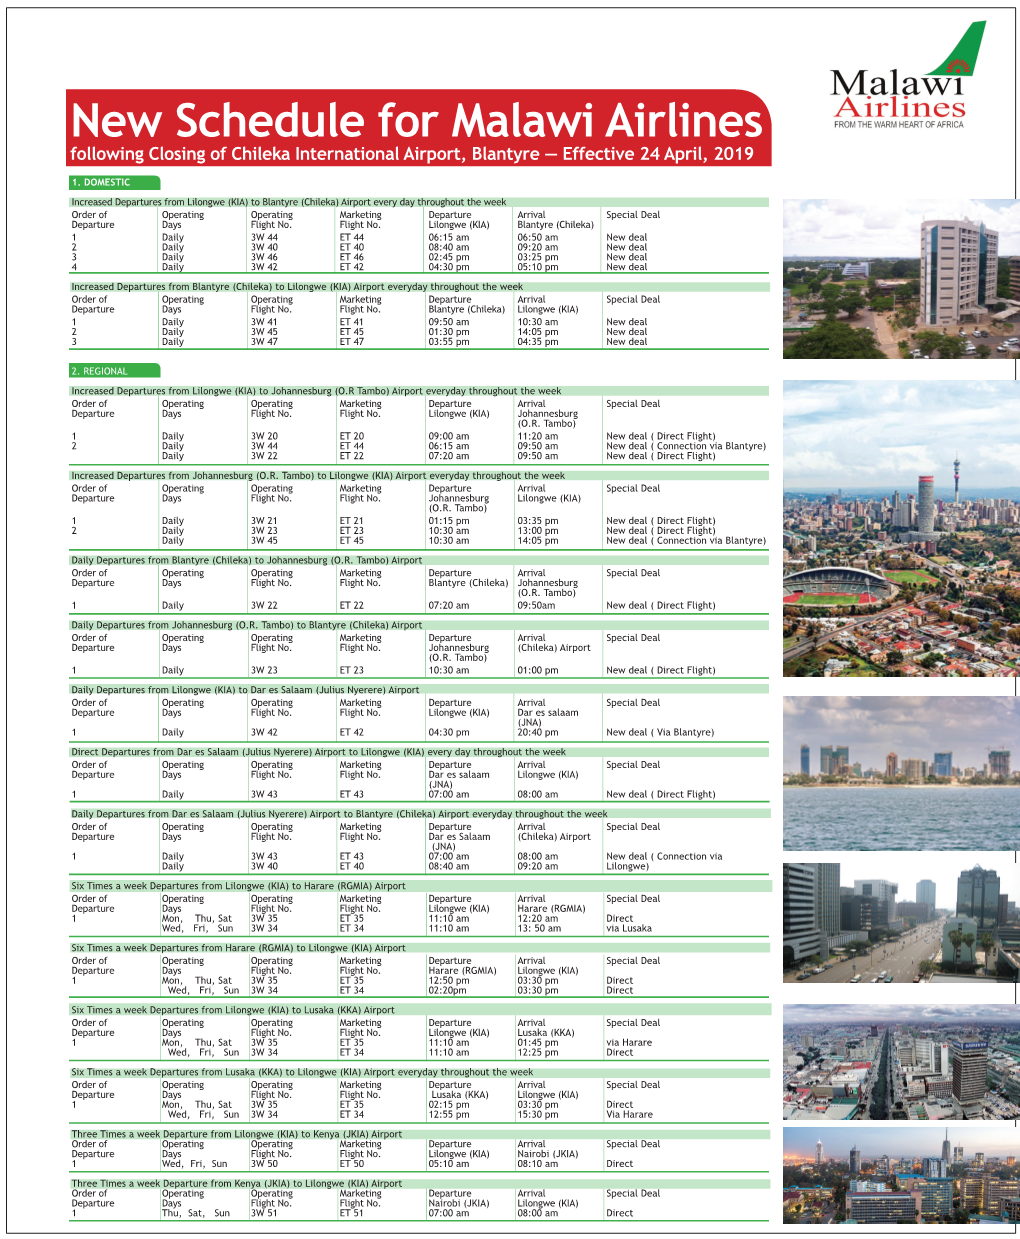 New Schedule for Malawi Airlines Following Closing of Chileka International Airport, Blantyre — Effective 24 April, 2019